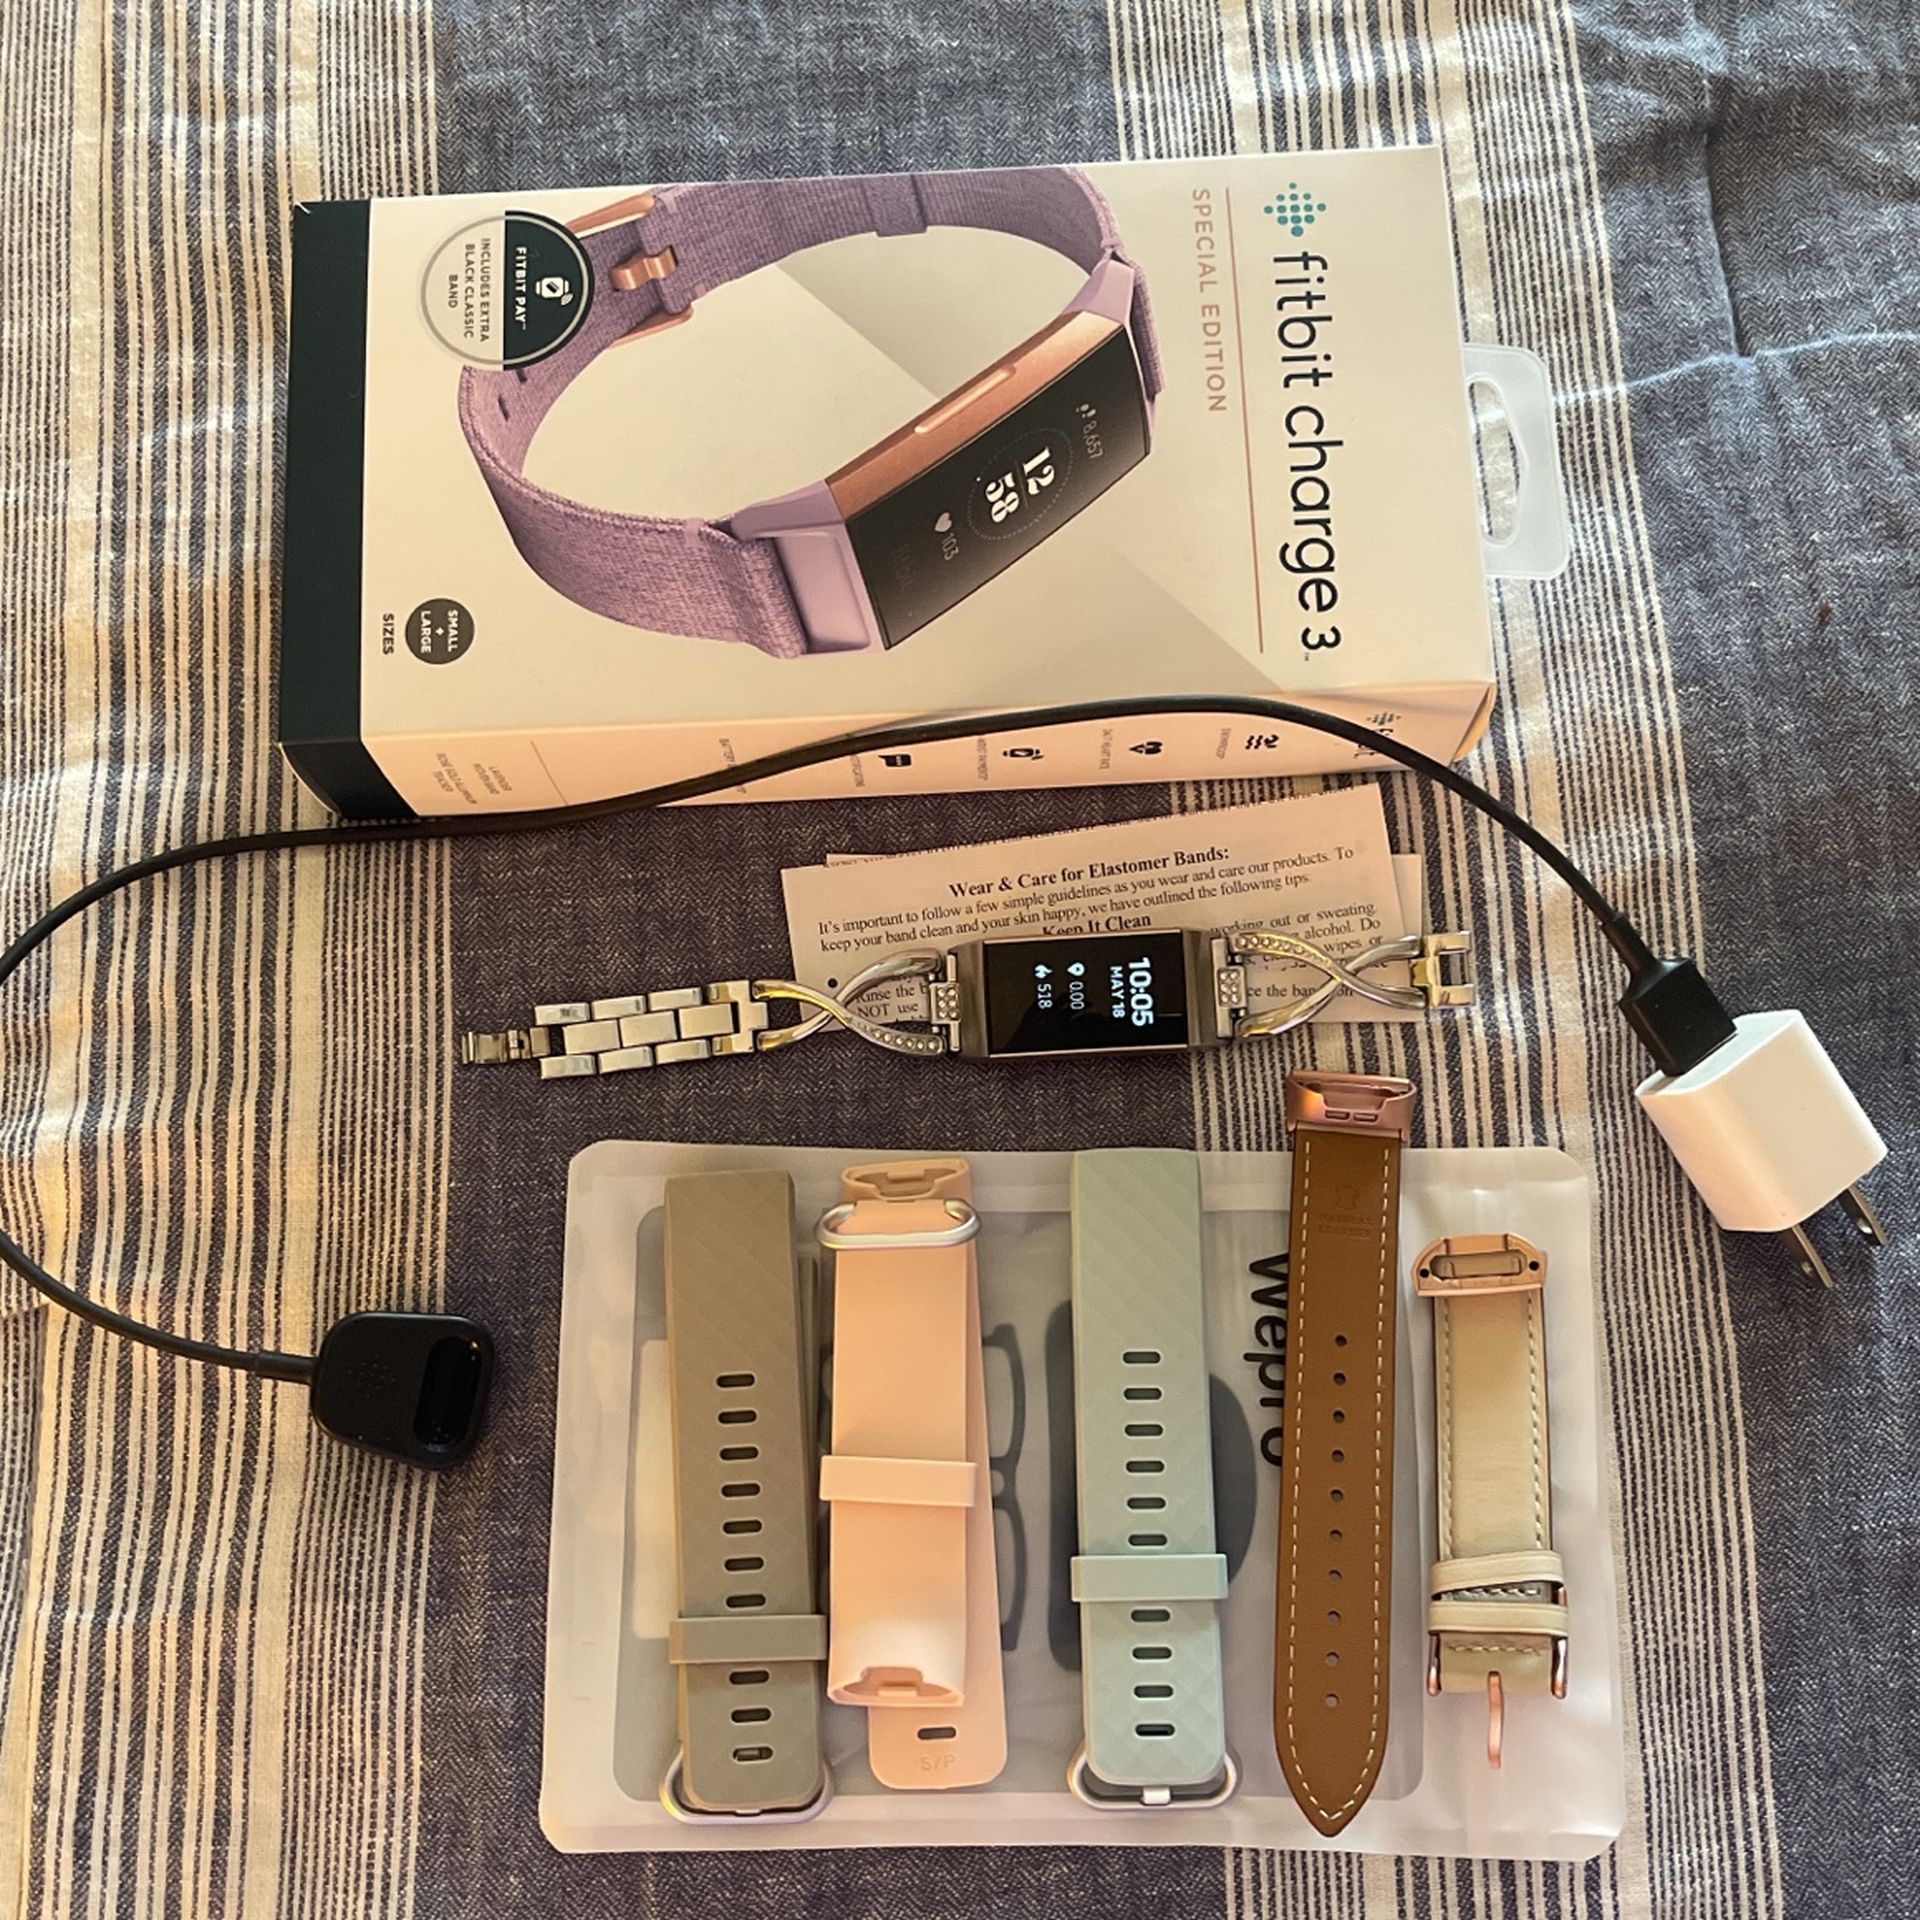 Fitbit Charge 3, Charger, Multiple Bands and Original Box